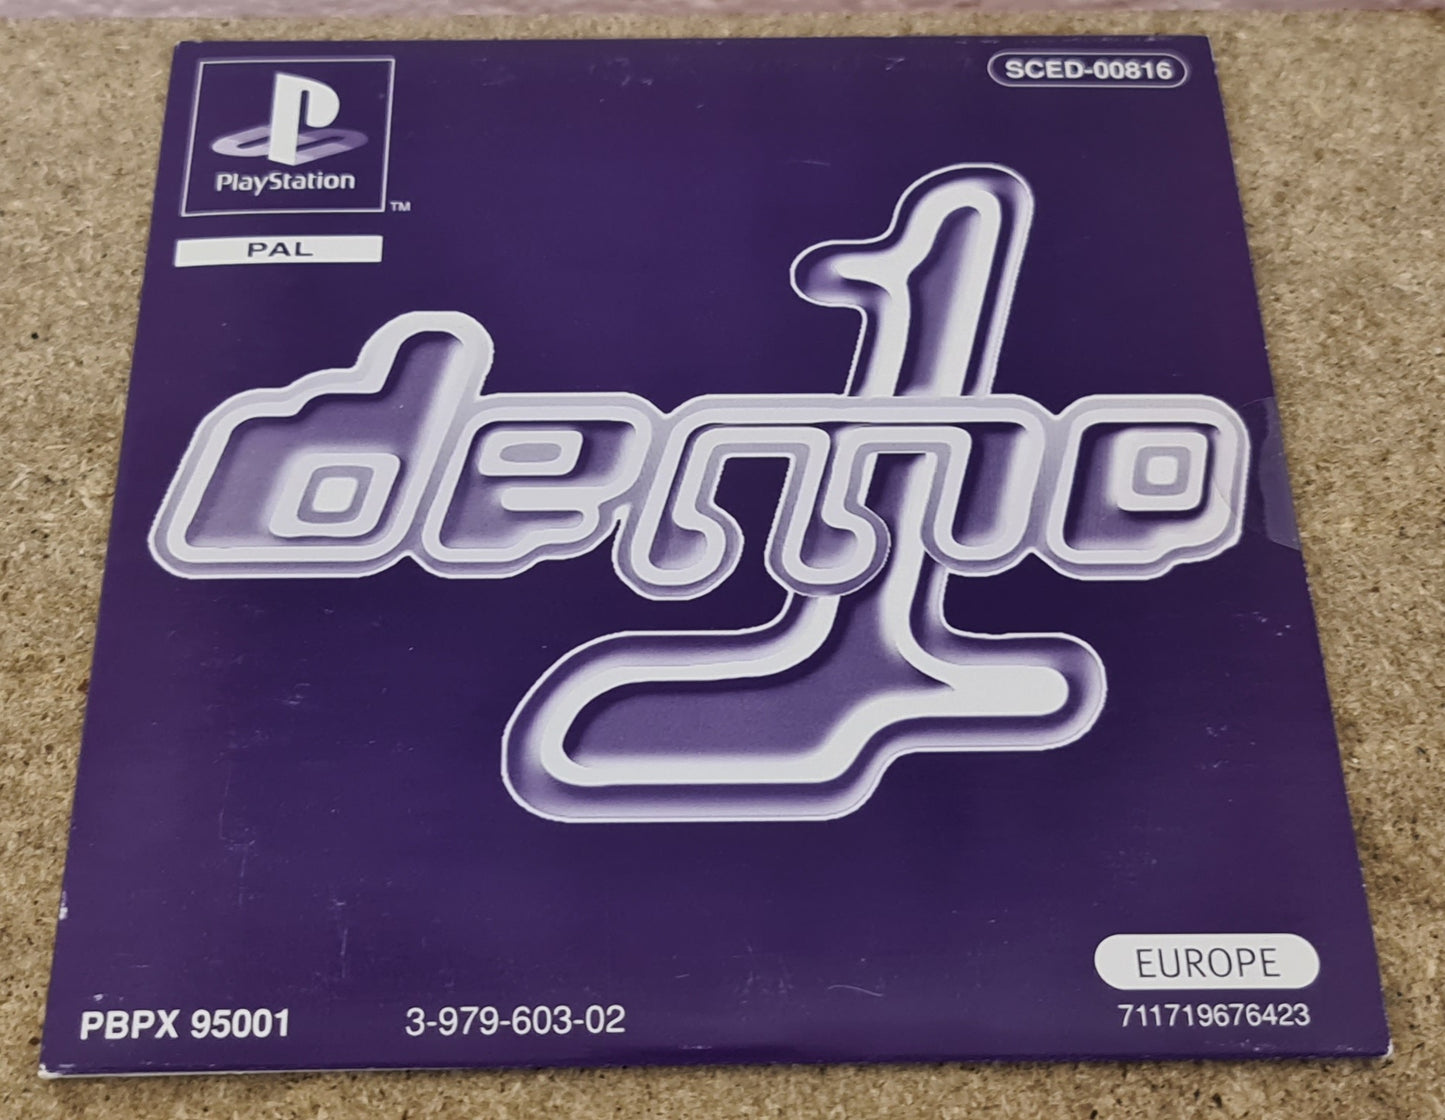 Brand New Demo 1 Europe SCED 00816 Sony Playstation 1 Demo Disc